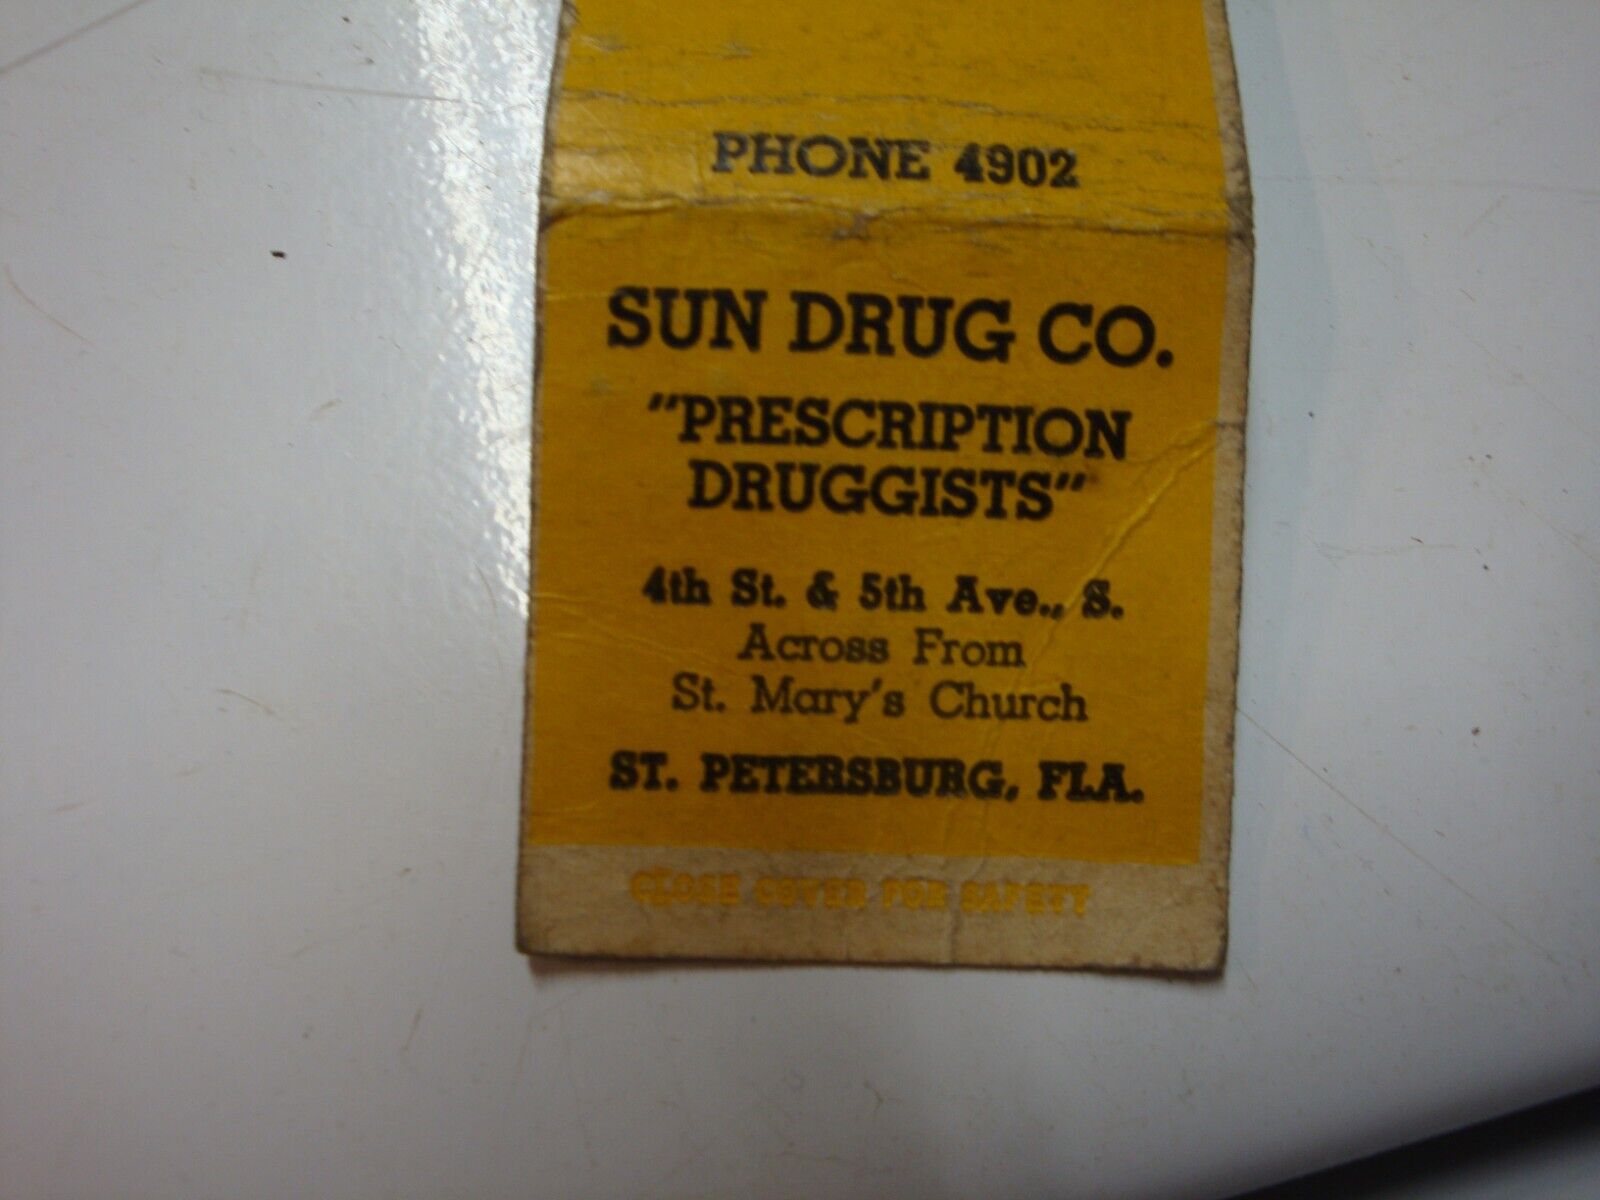 Sun Drug Co. St. Petersburg, FL. Made by Advance Match co. 1930s-40s